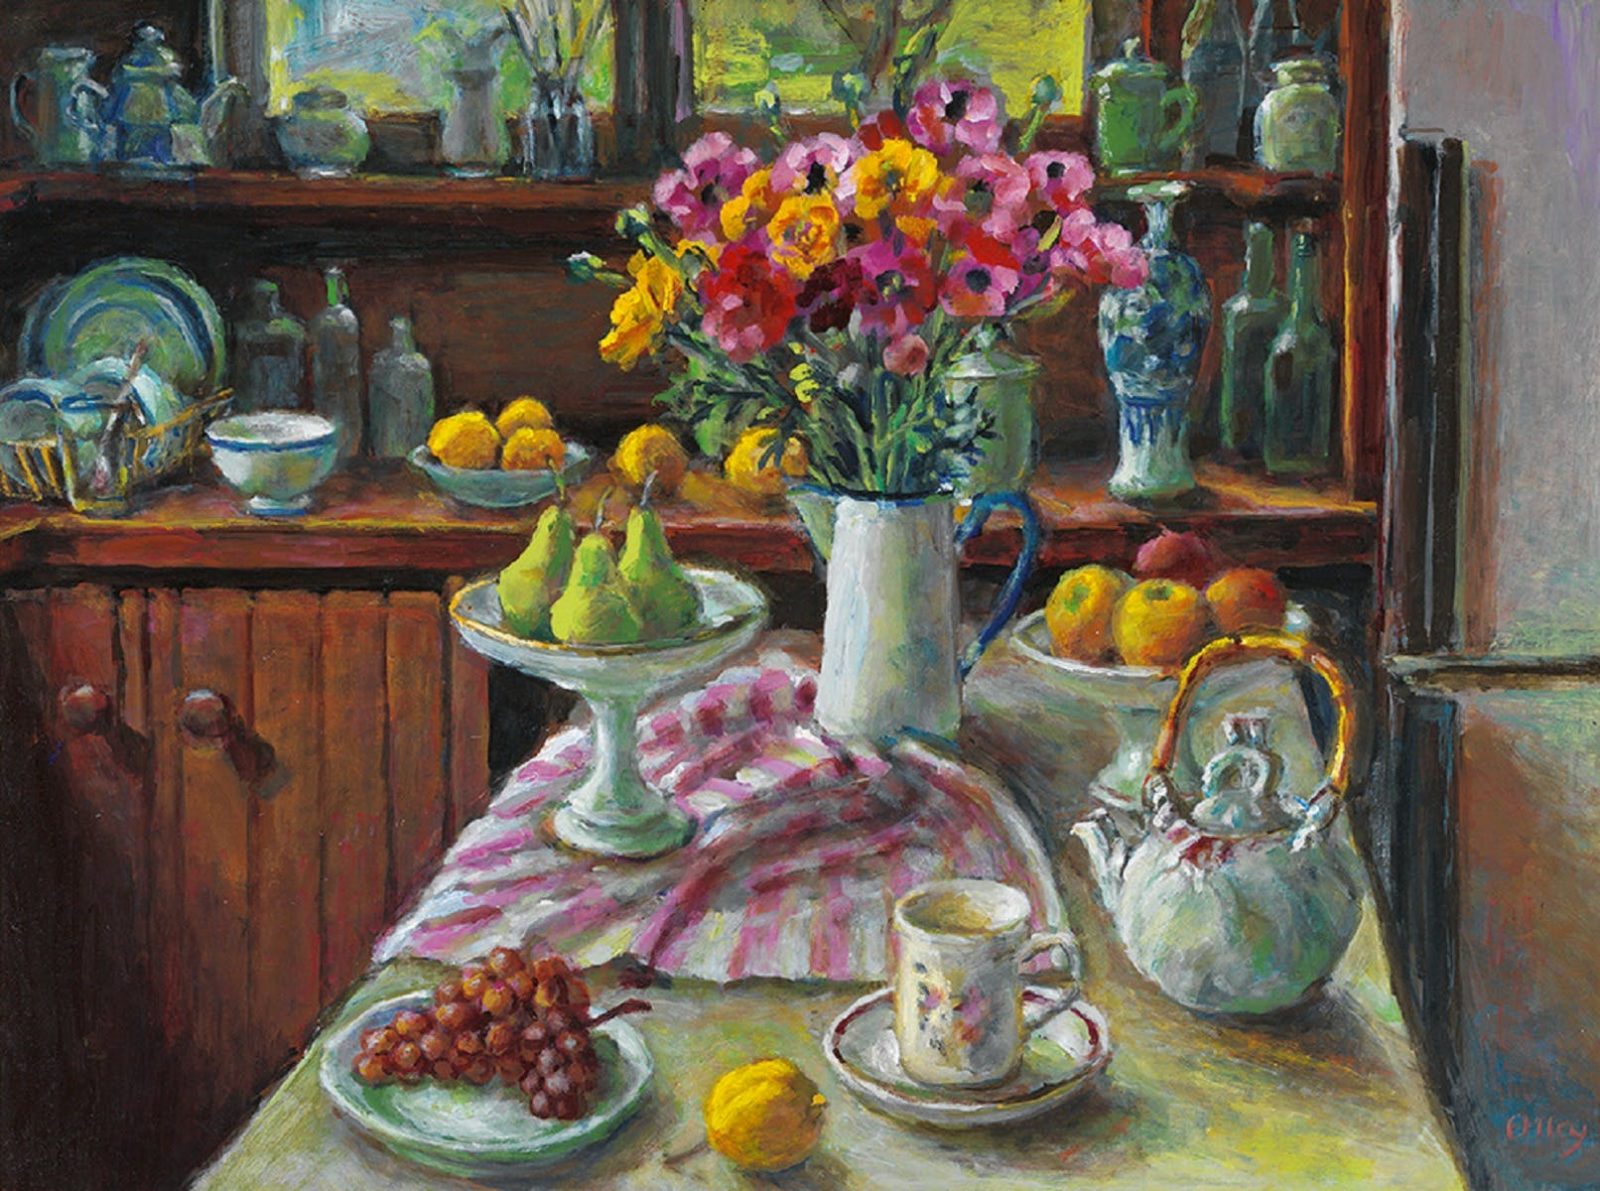 Margaret Olley (1923 – 2011) 'Ranunculus and pears' 2004 oil on board